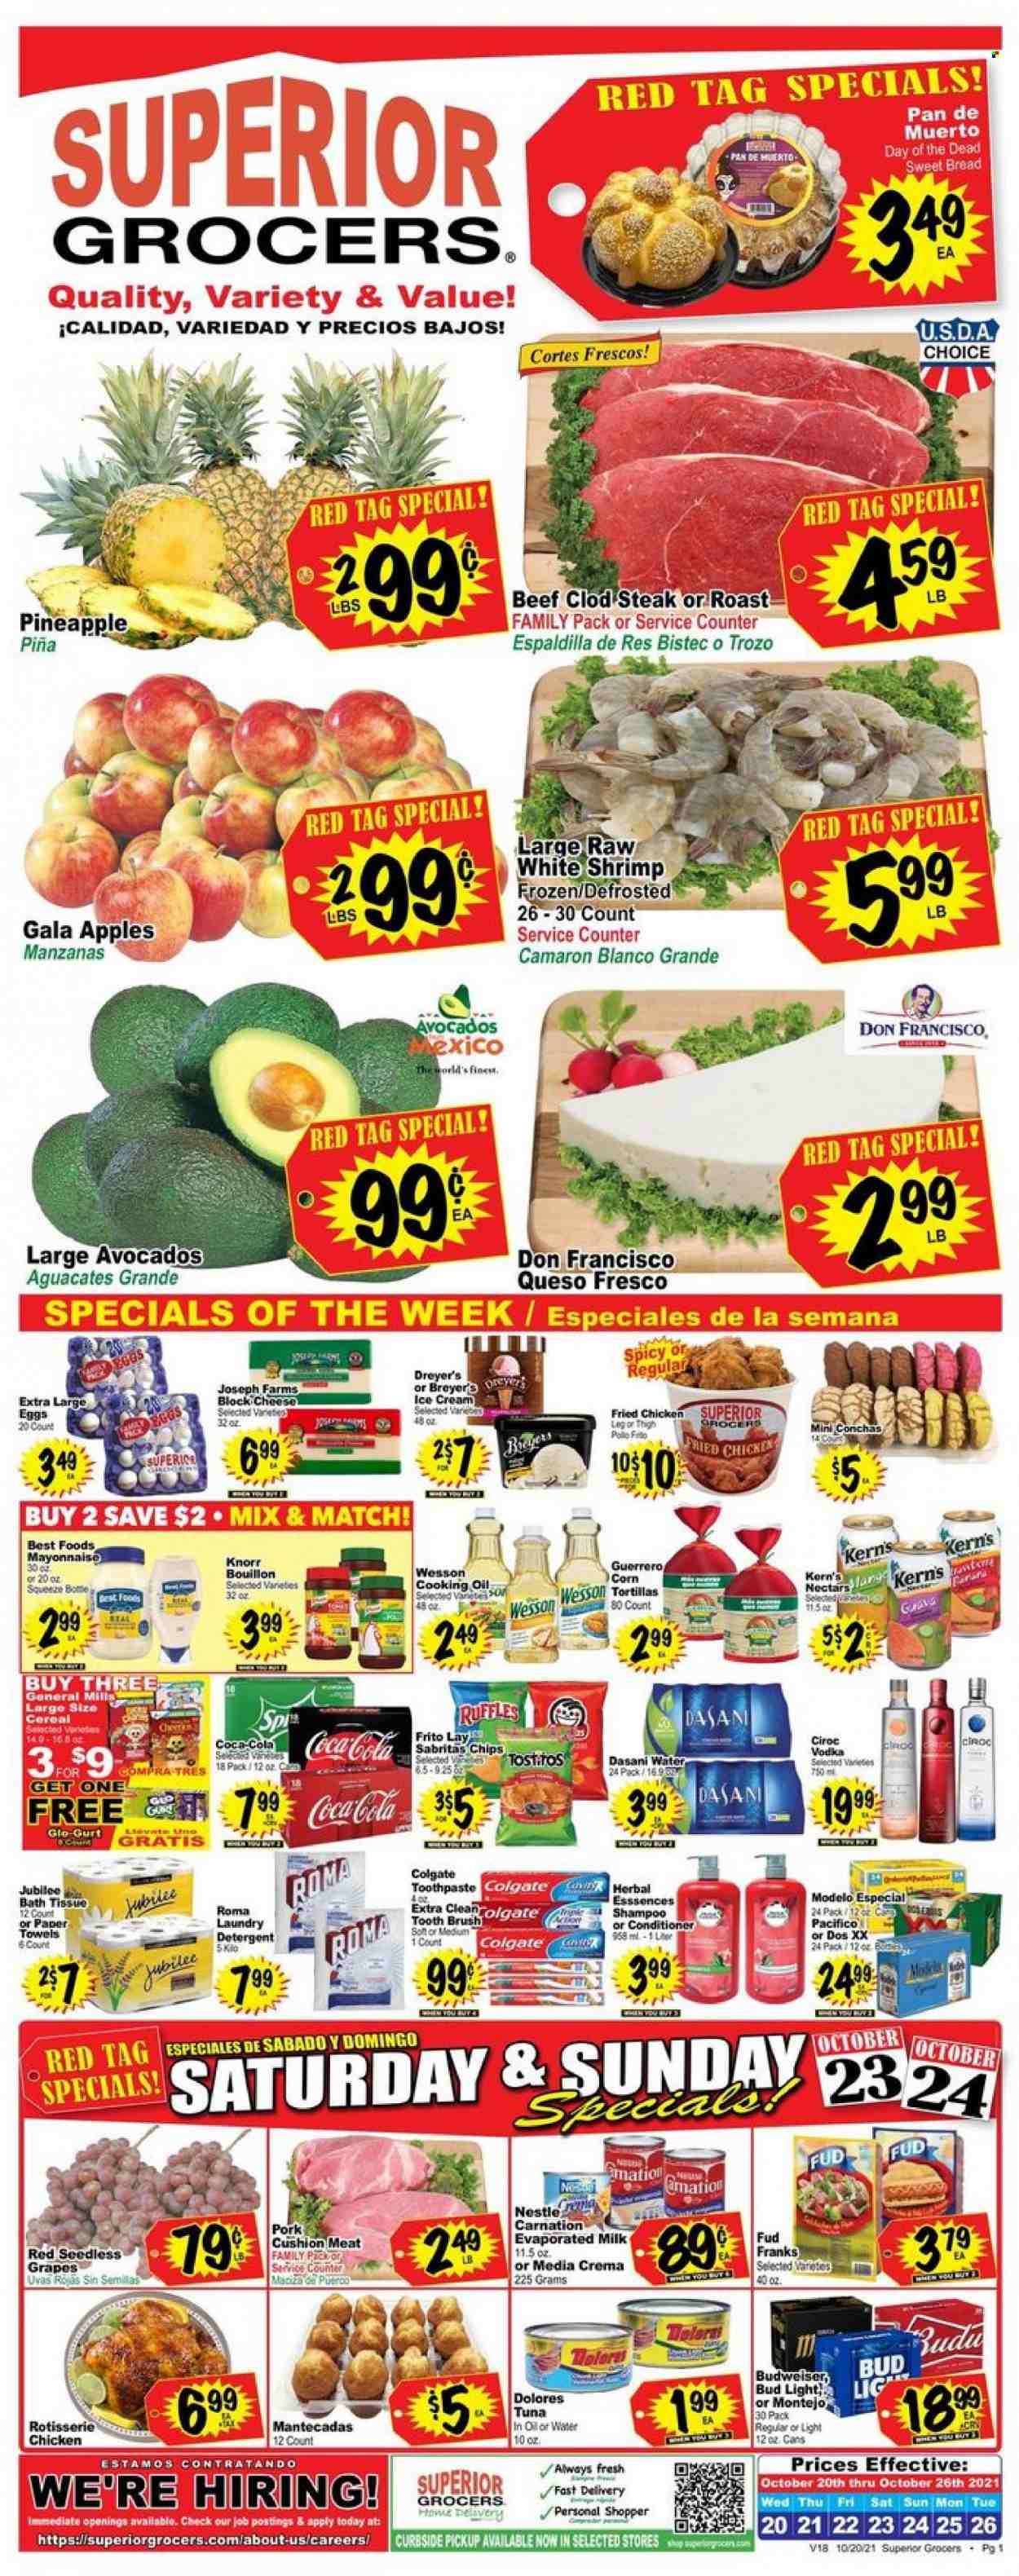 Superior Grocers ad  - 10.20.2021 - 10.26.2021.